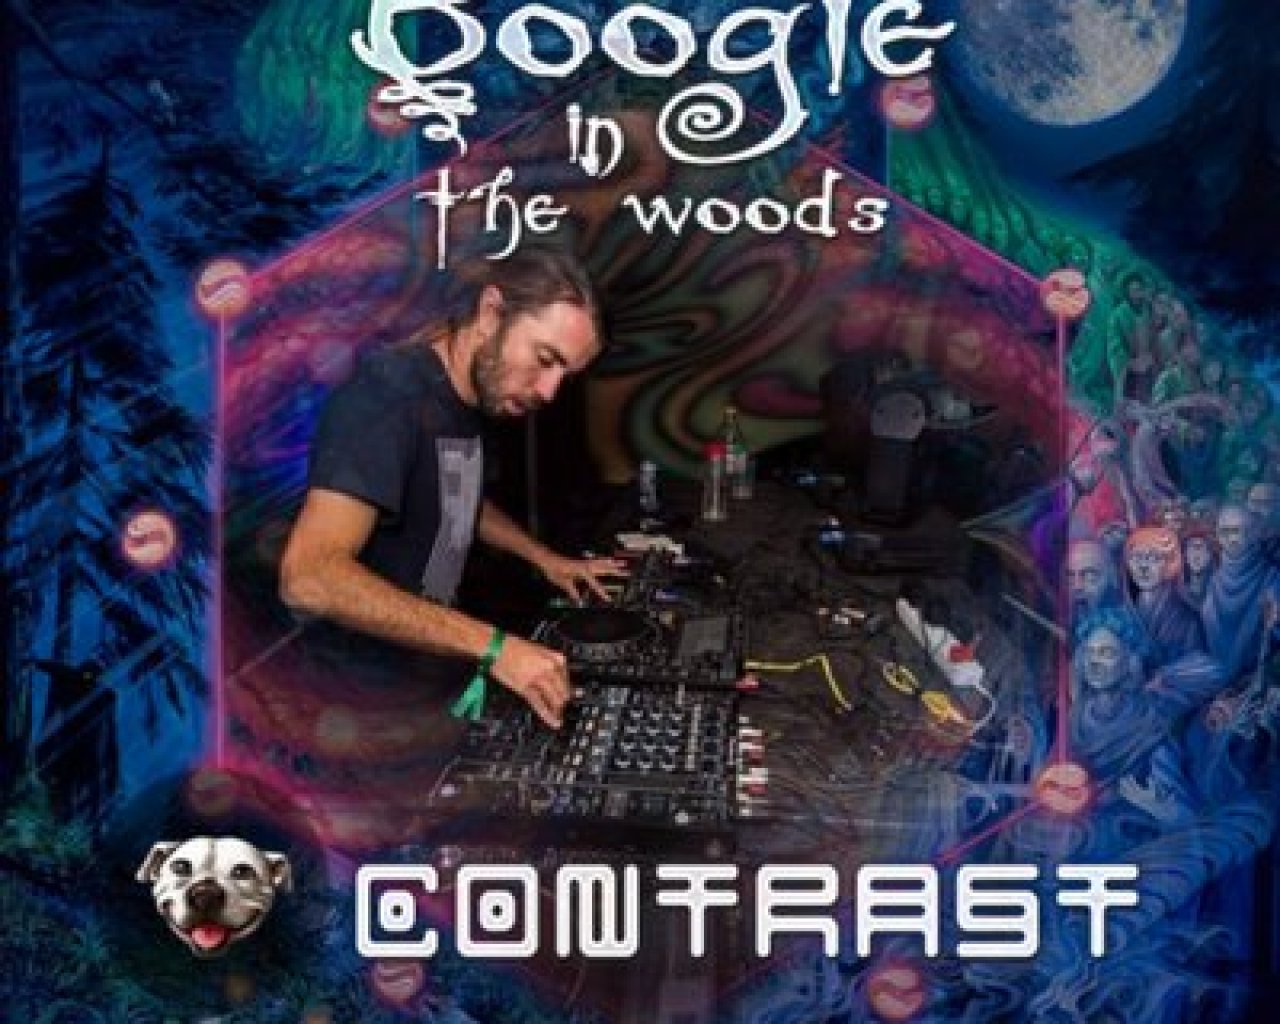 Contrast (Woo dog records)